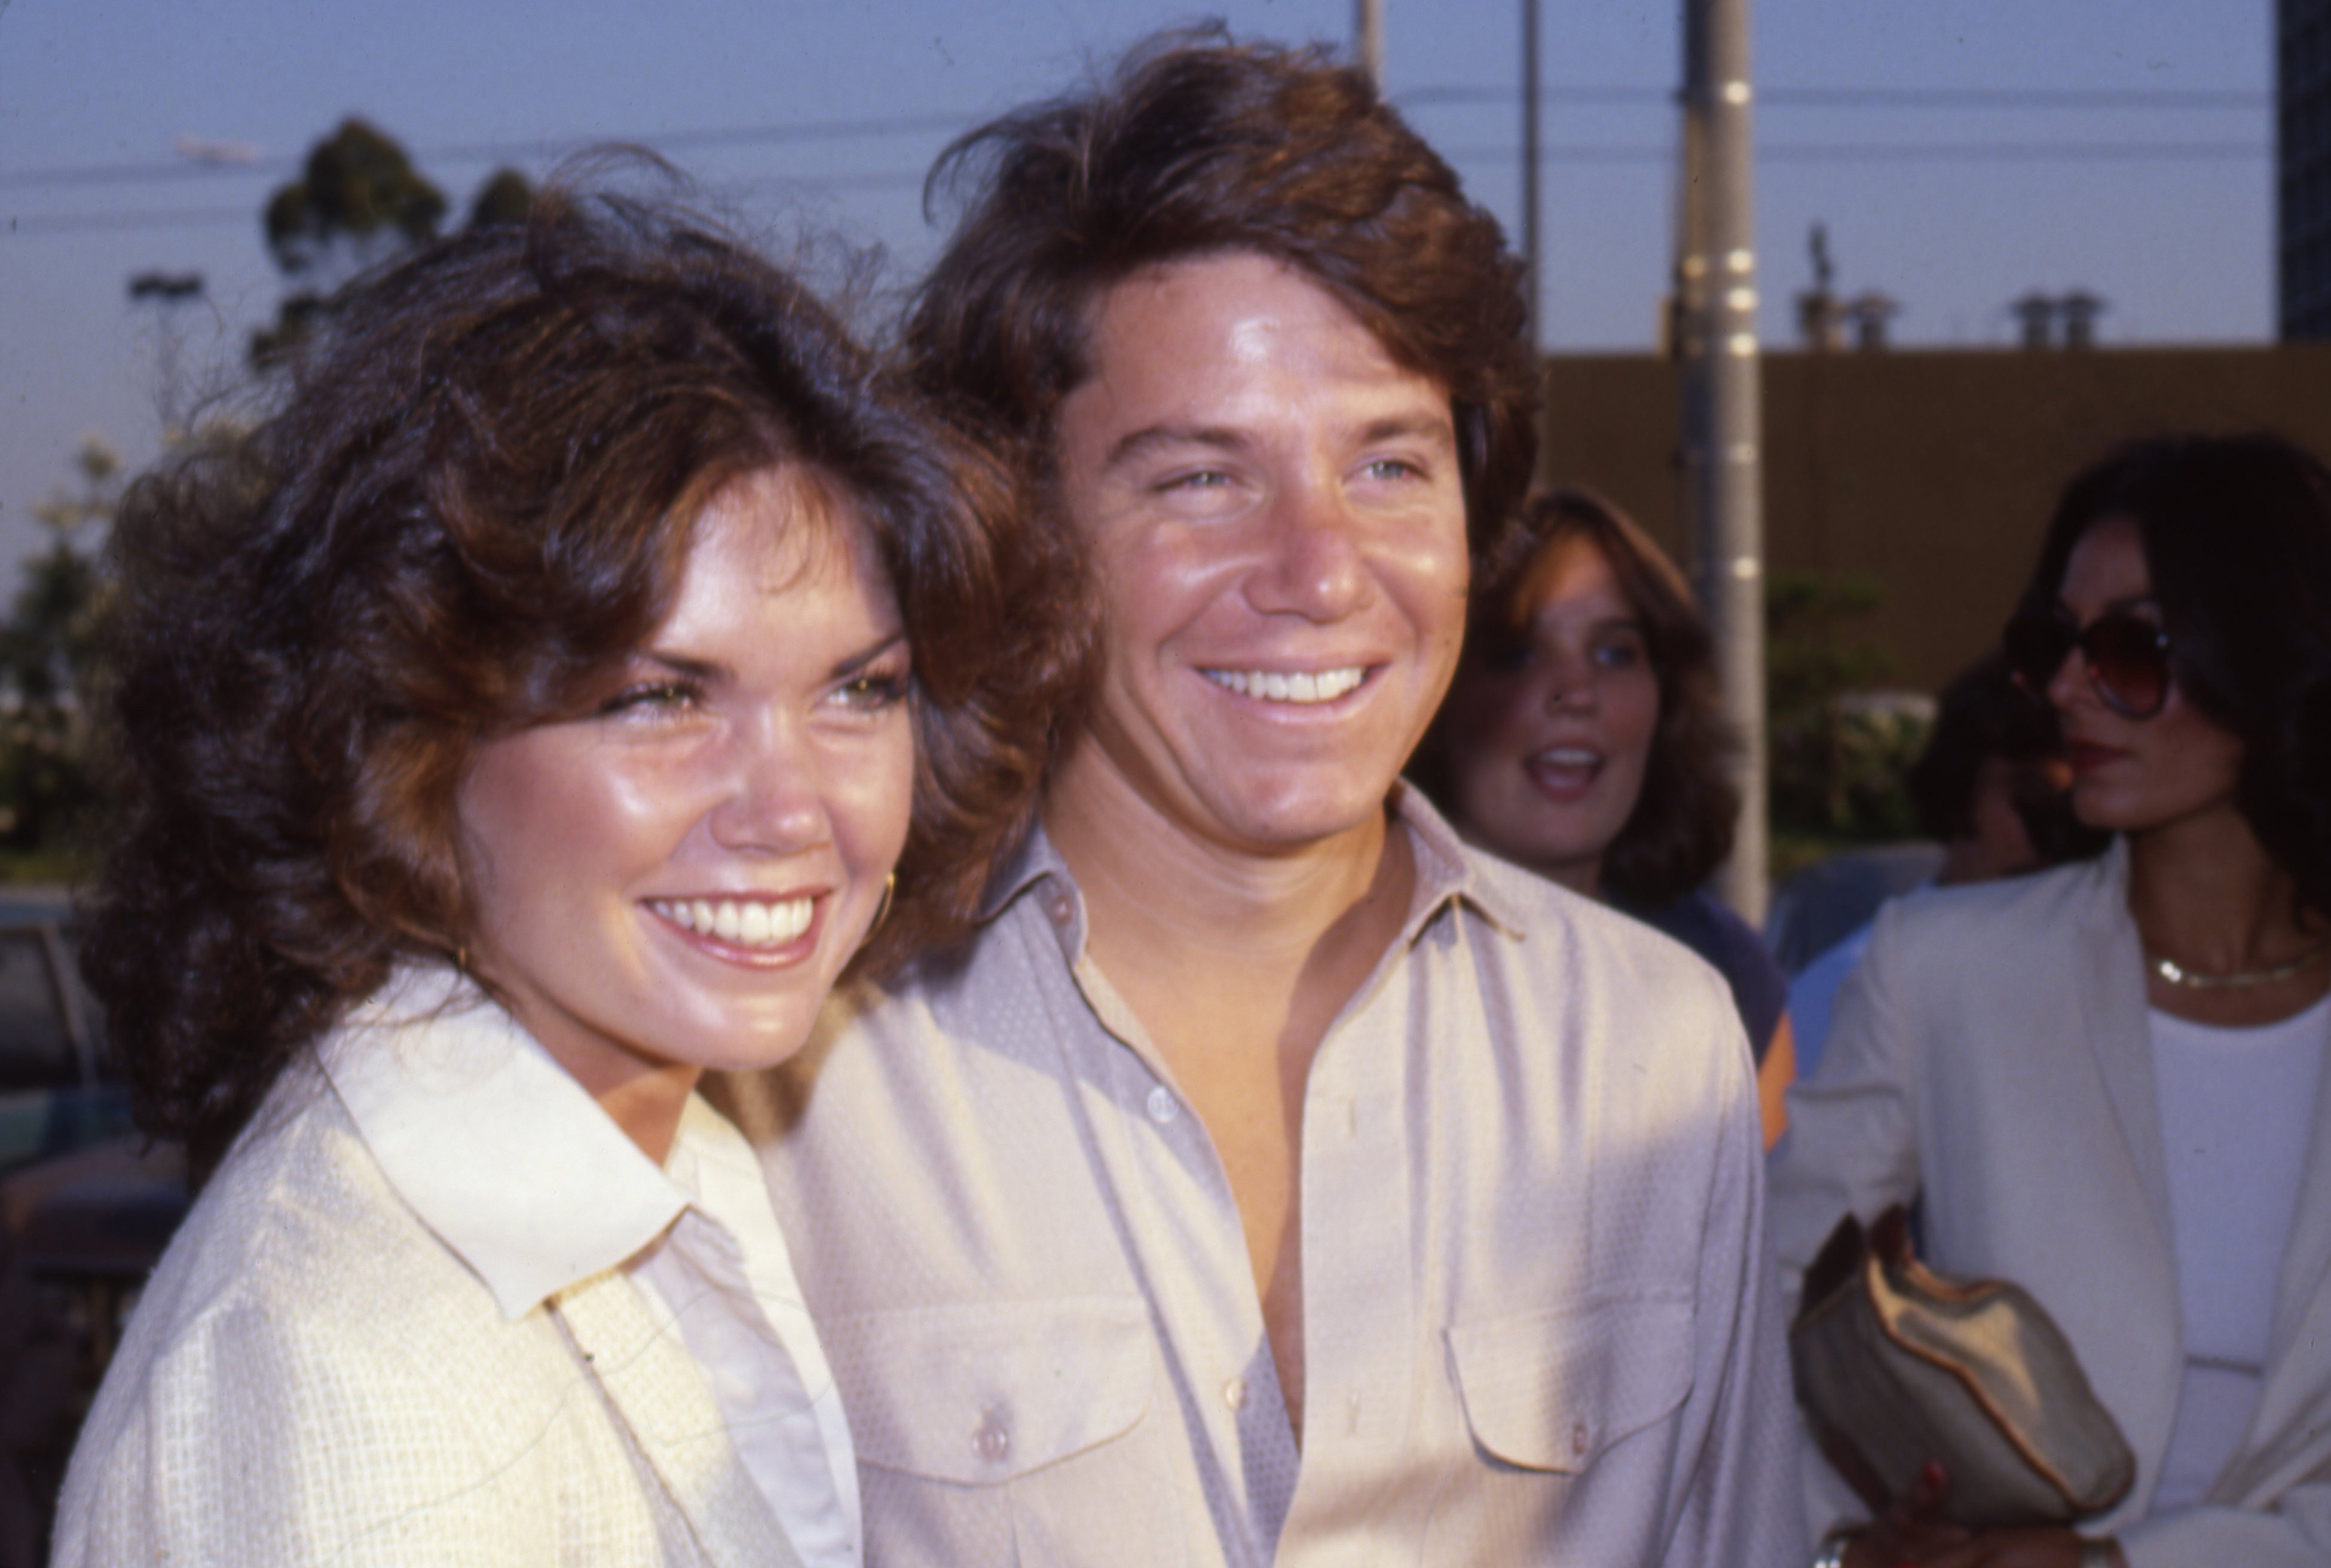 Lorrie Mahaffey and Anson Williams at an event in 1980 in Los Angeles | Source: Getty Images